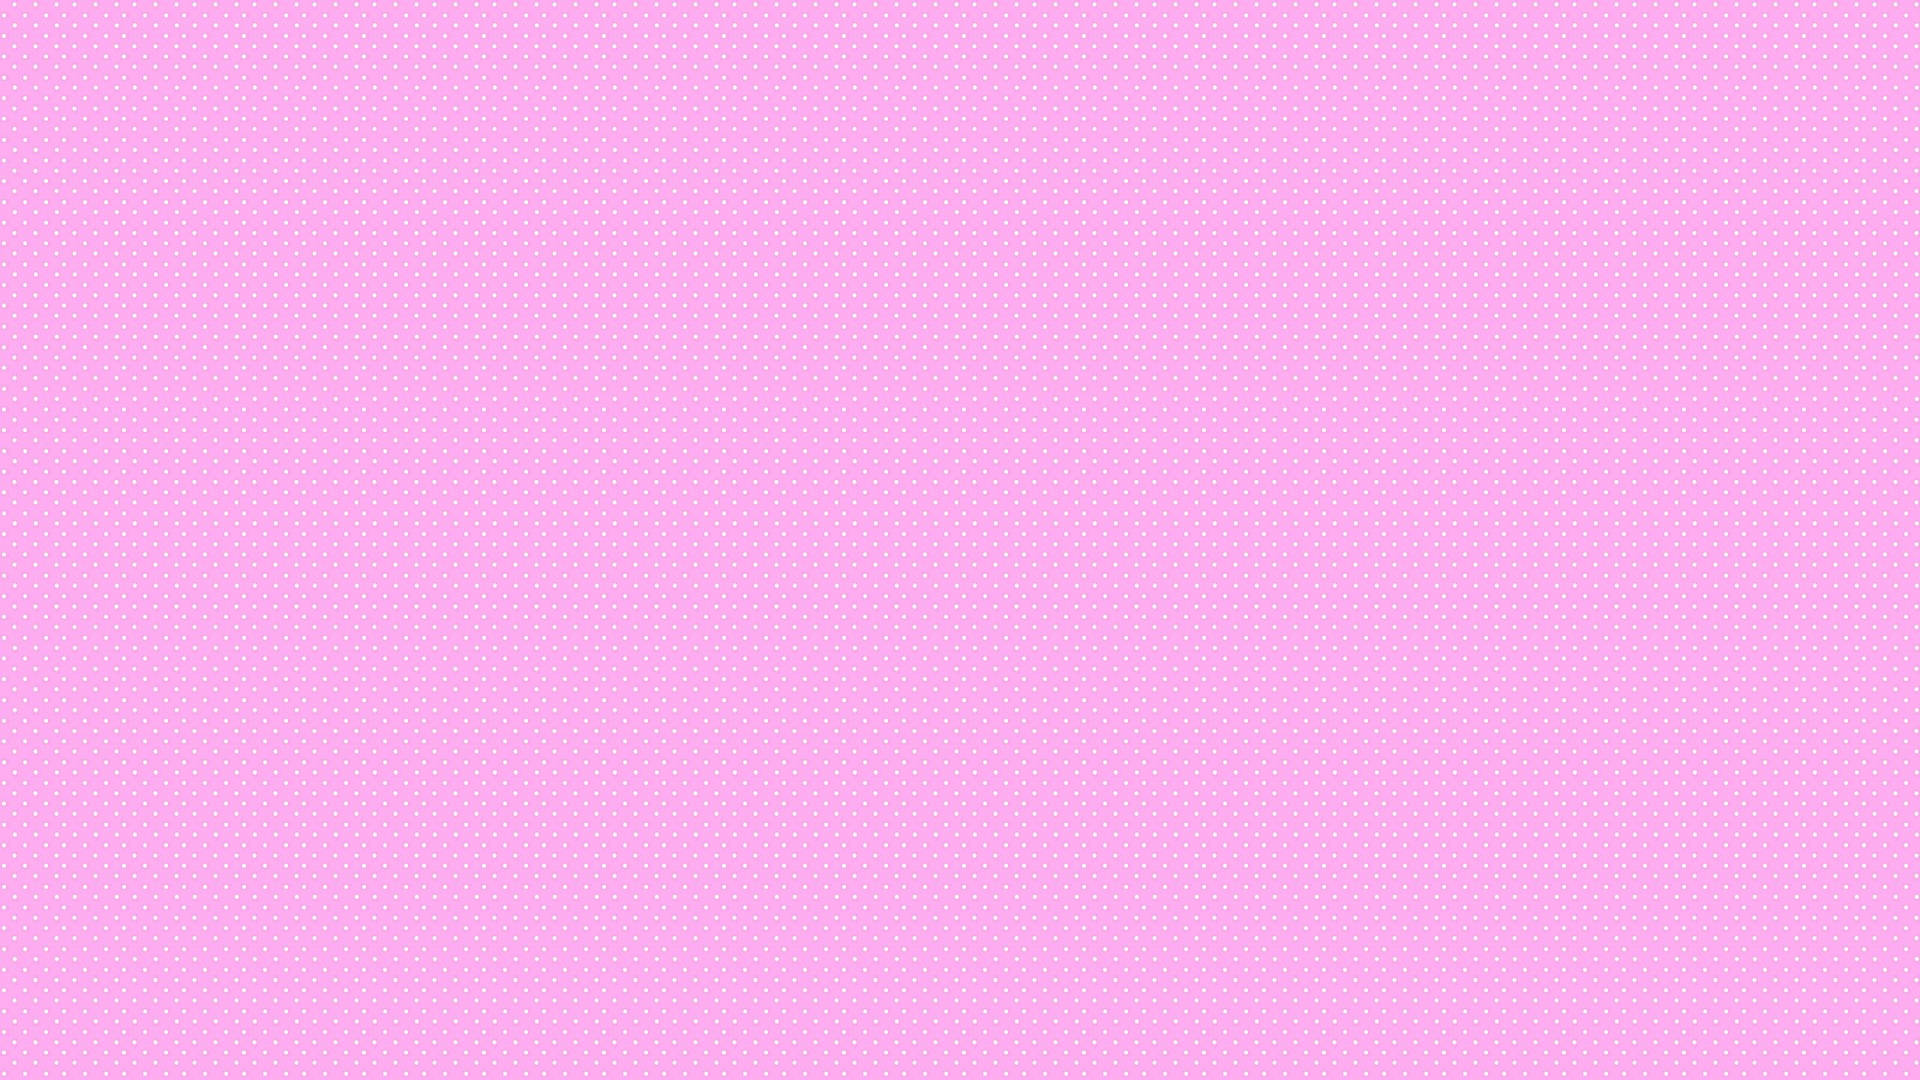 Aesthetic Youtube Pink With White Dots